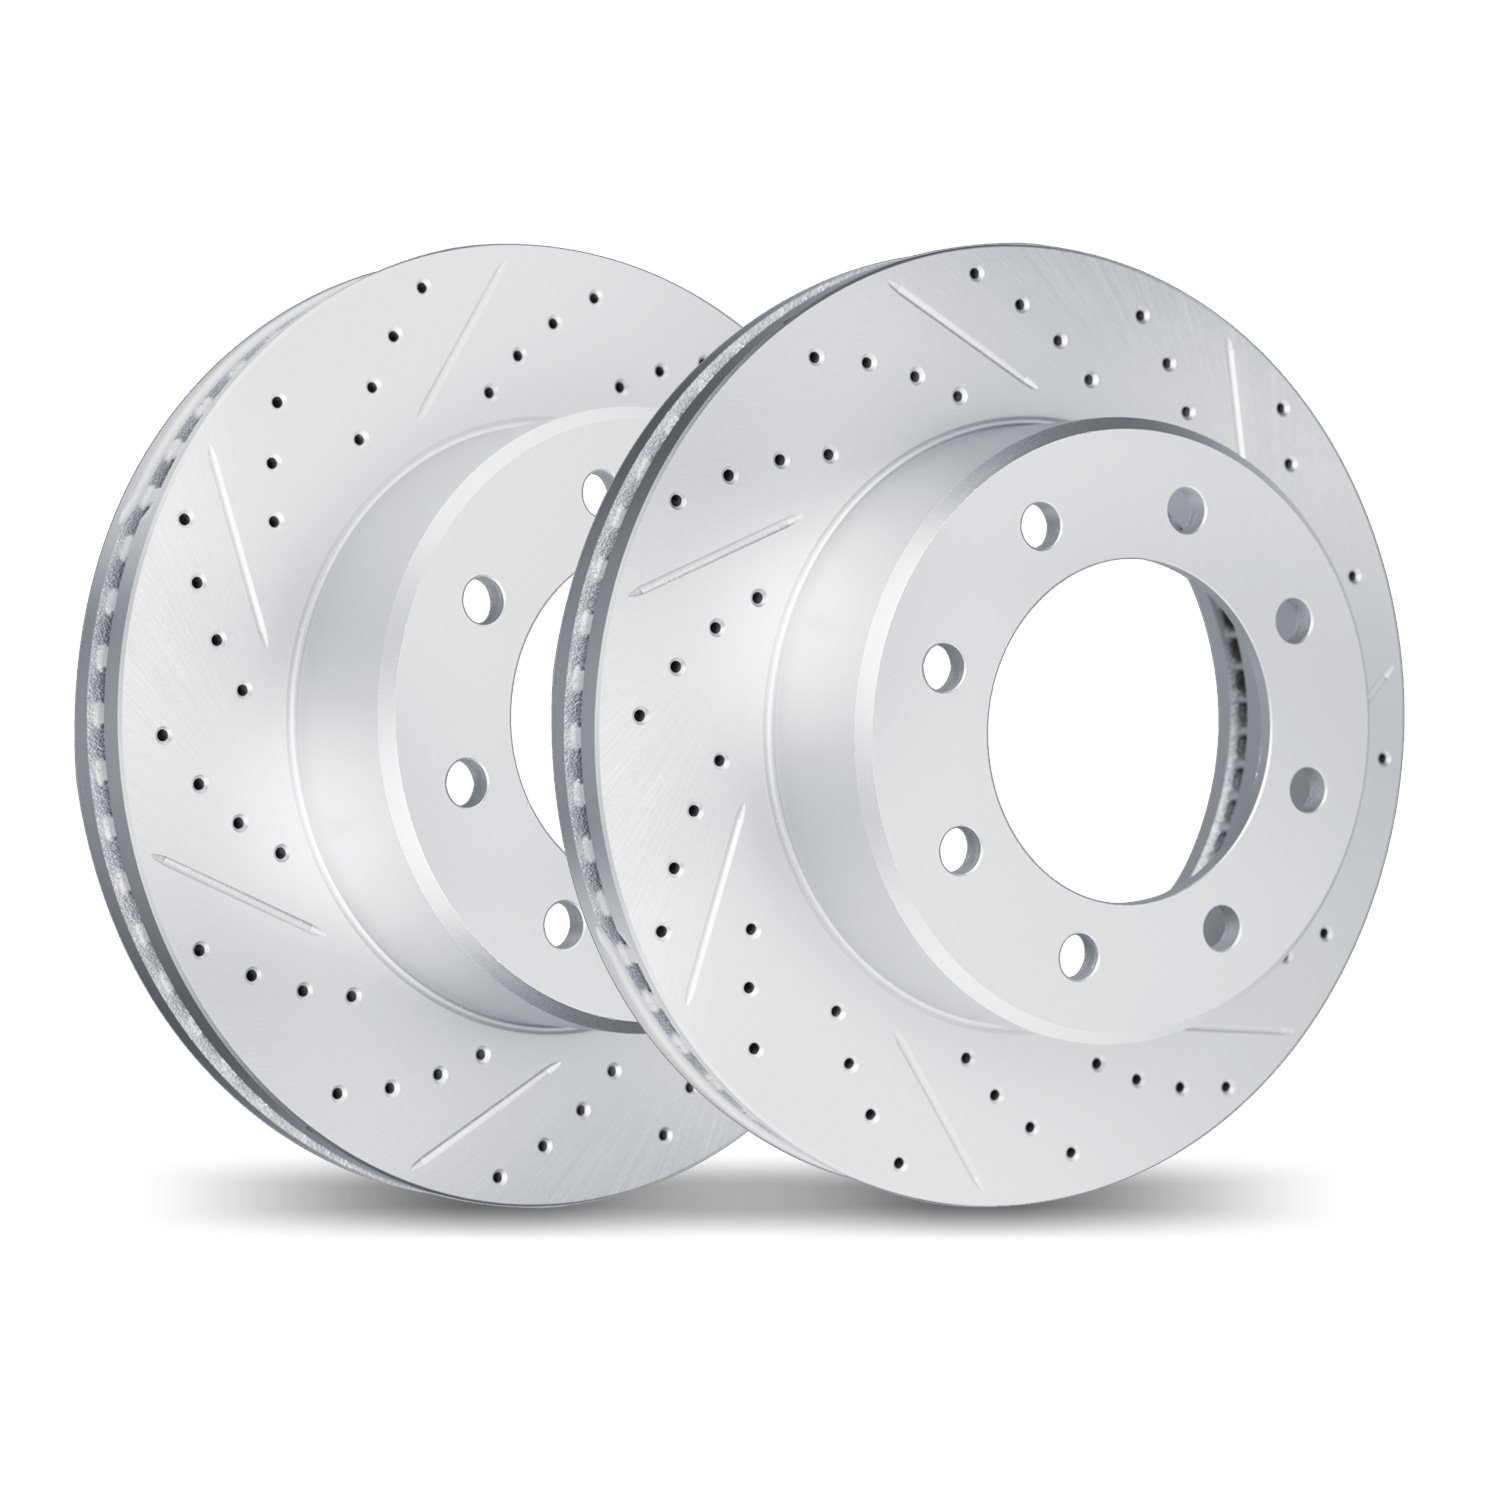 2002-48048 Geoperformance Drilled/Slotted Brake Rotors, Fits Select GM, Position: Rear